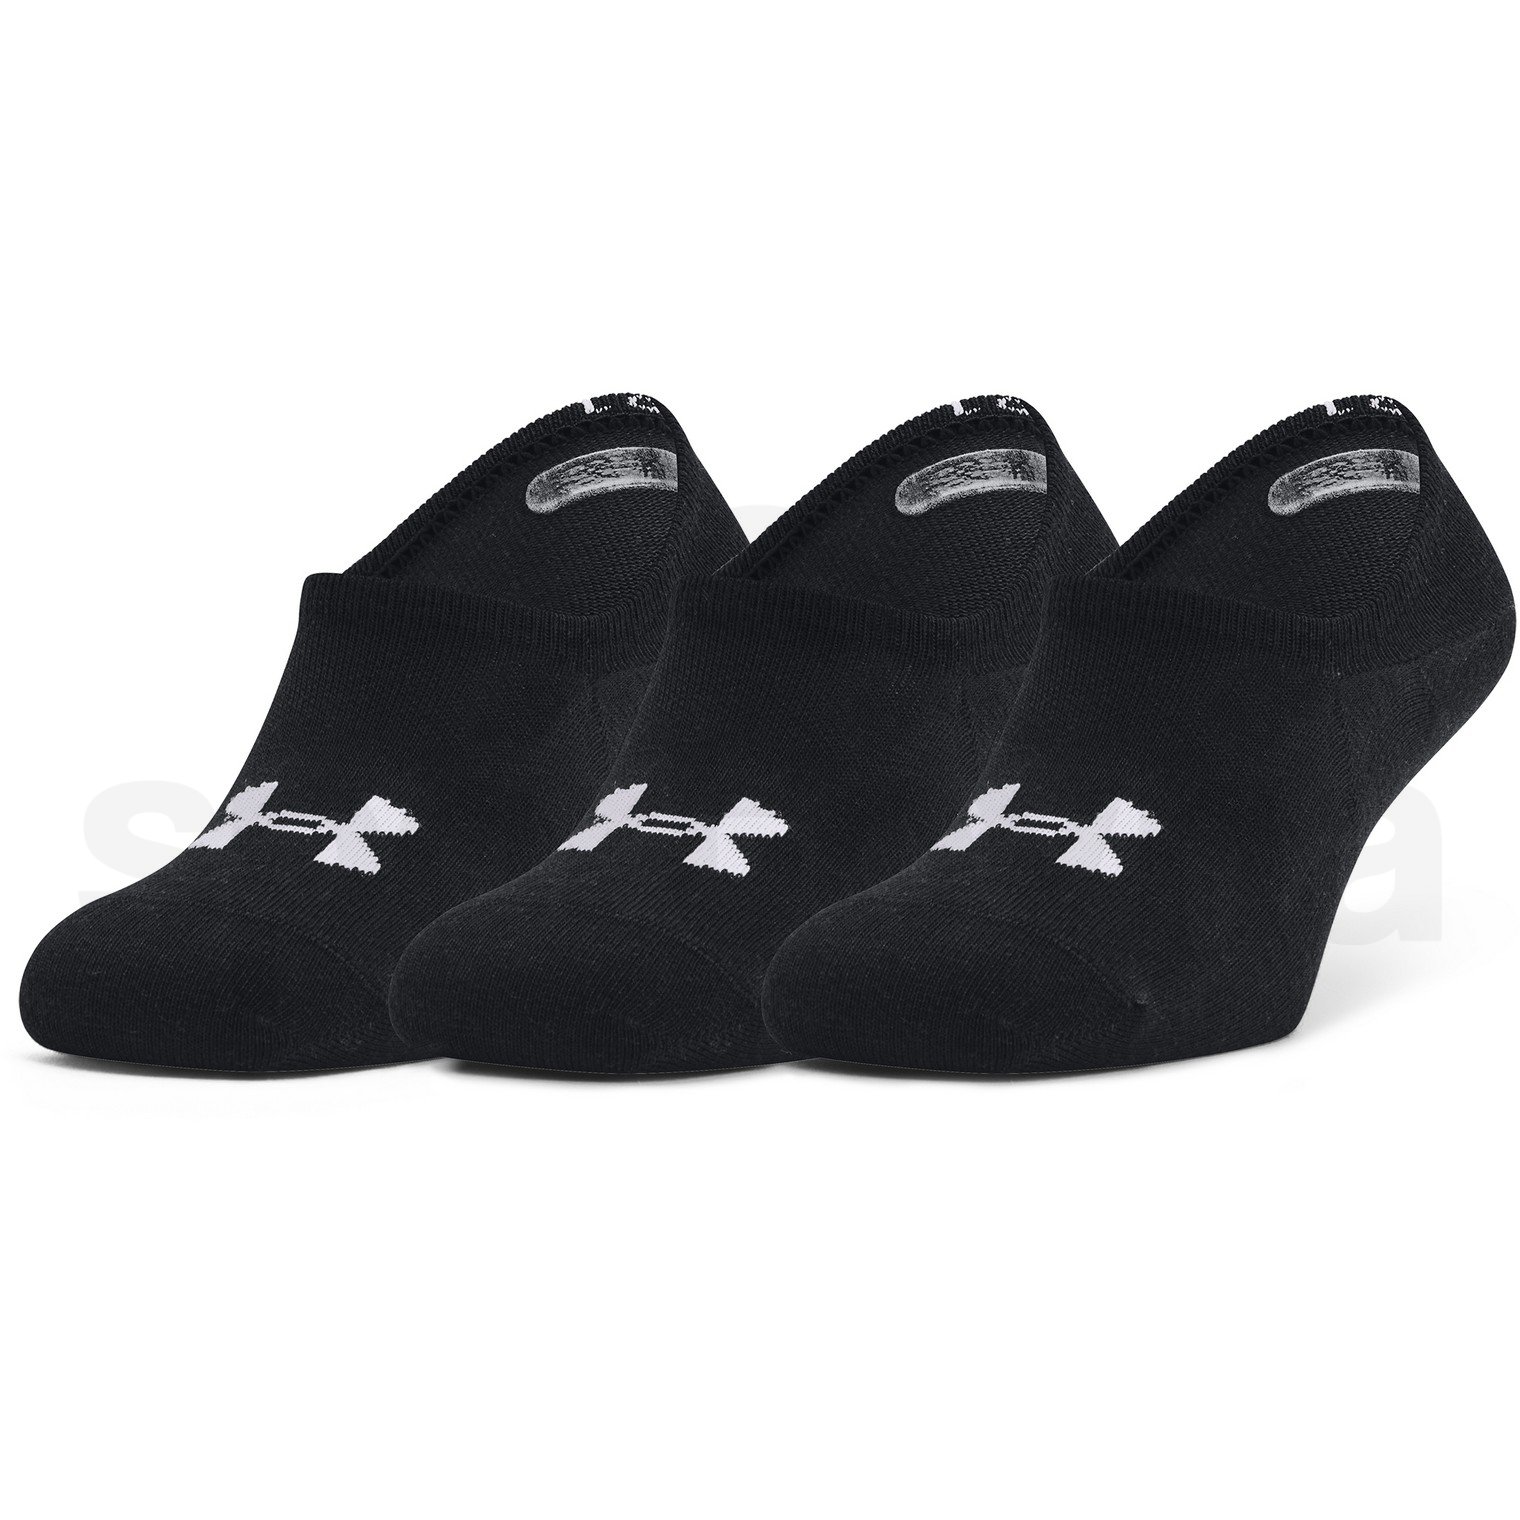 under-armour-ua-core-ultra-low-3pk_1358342-001_1